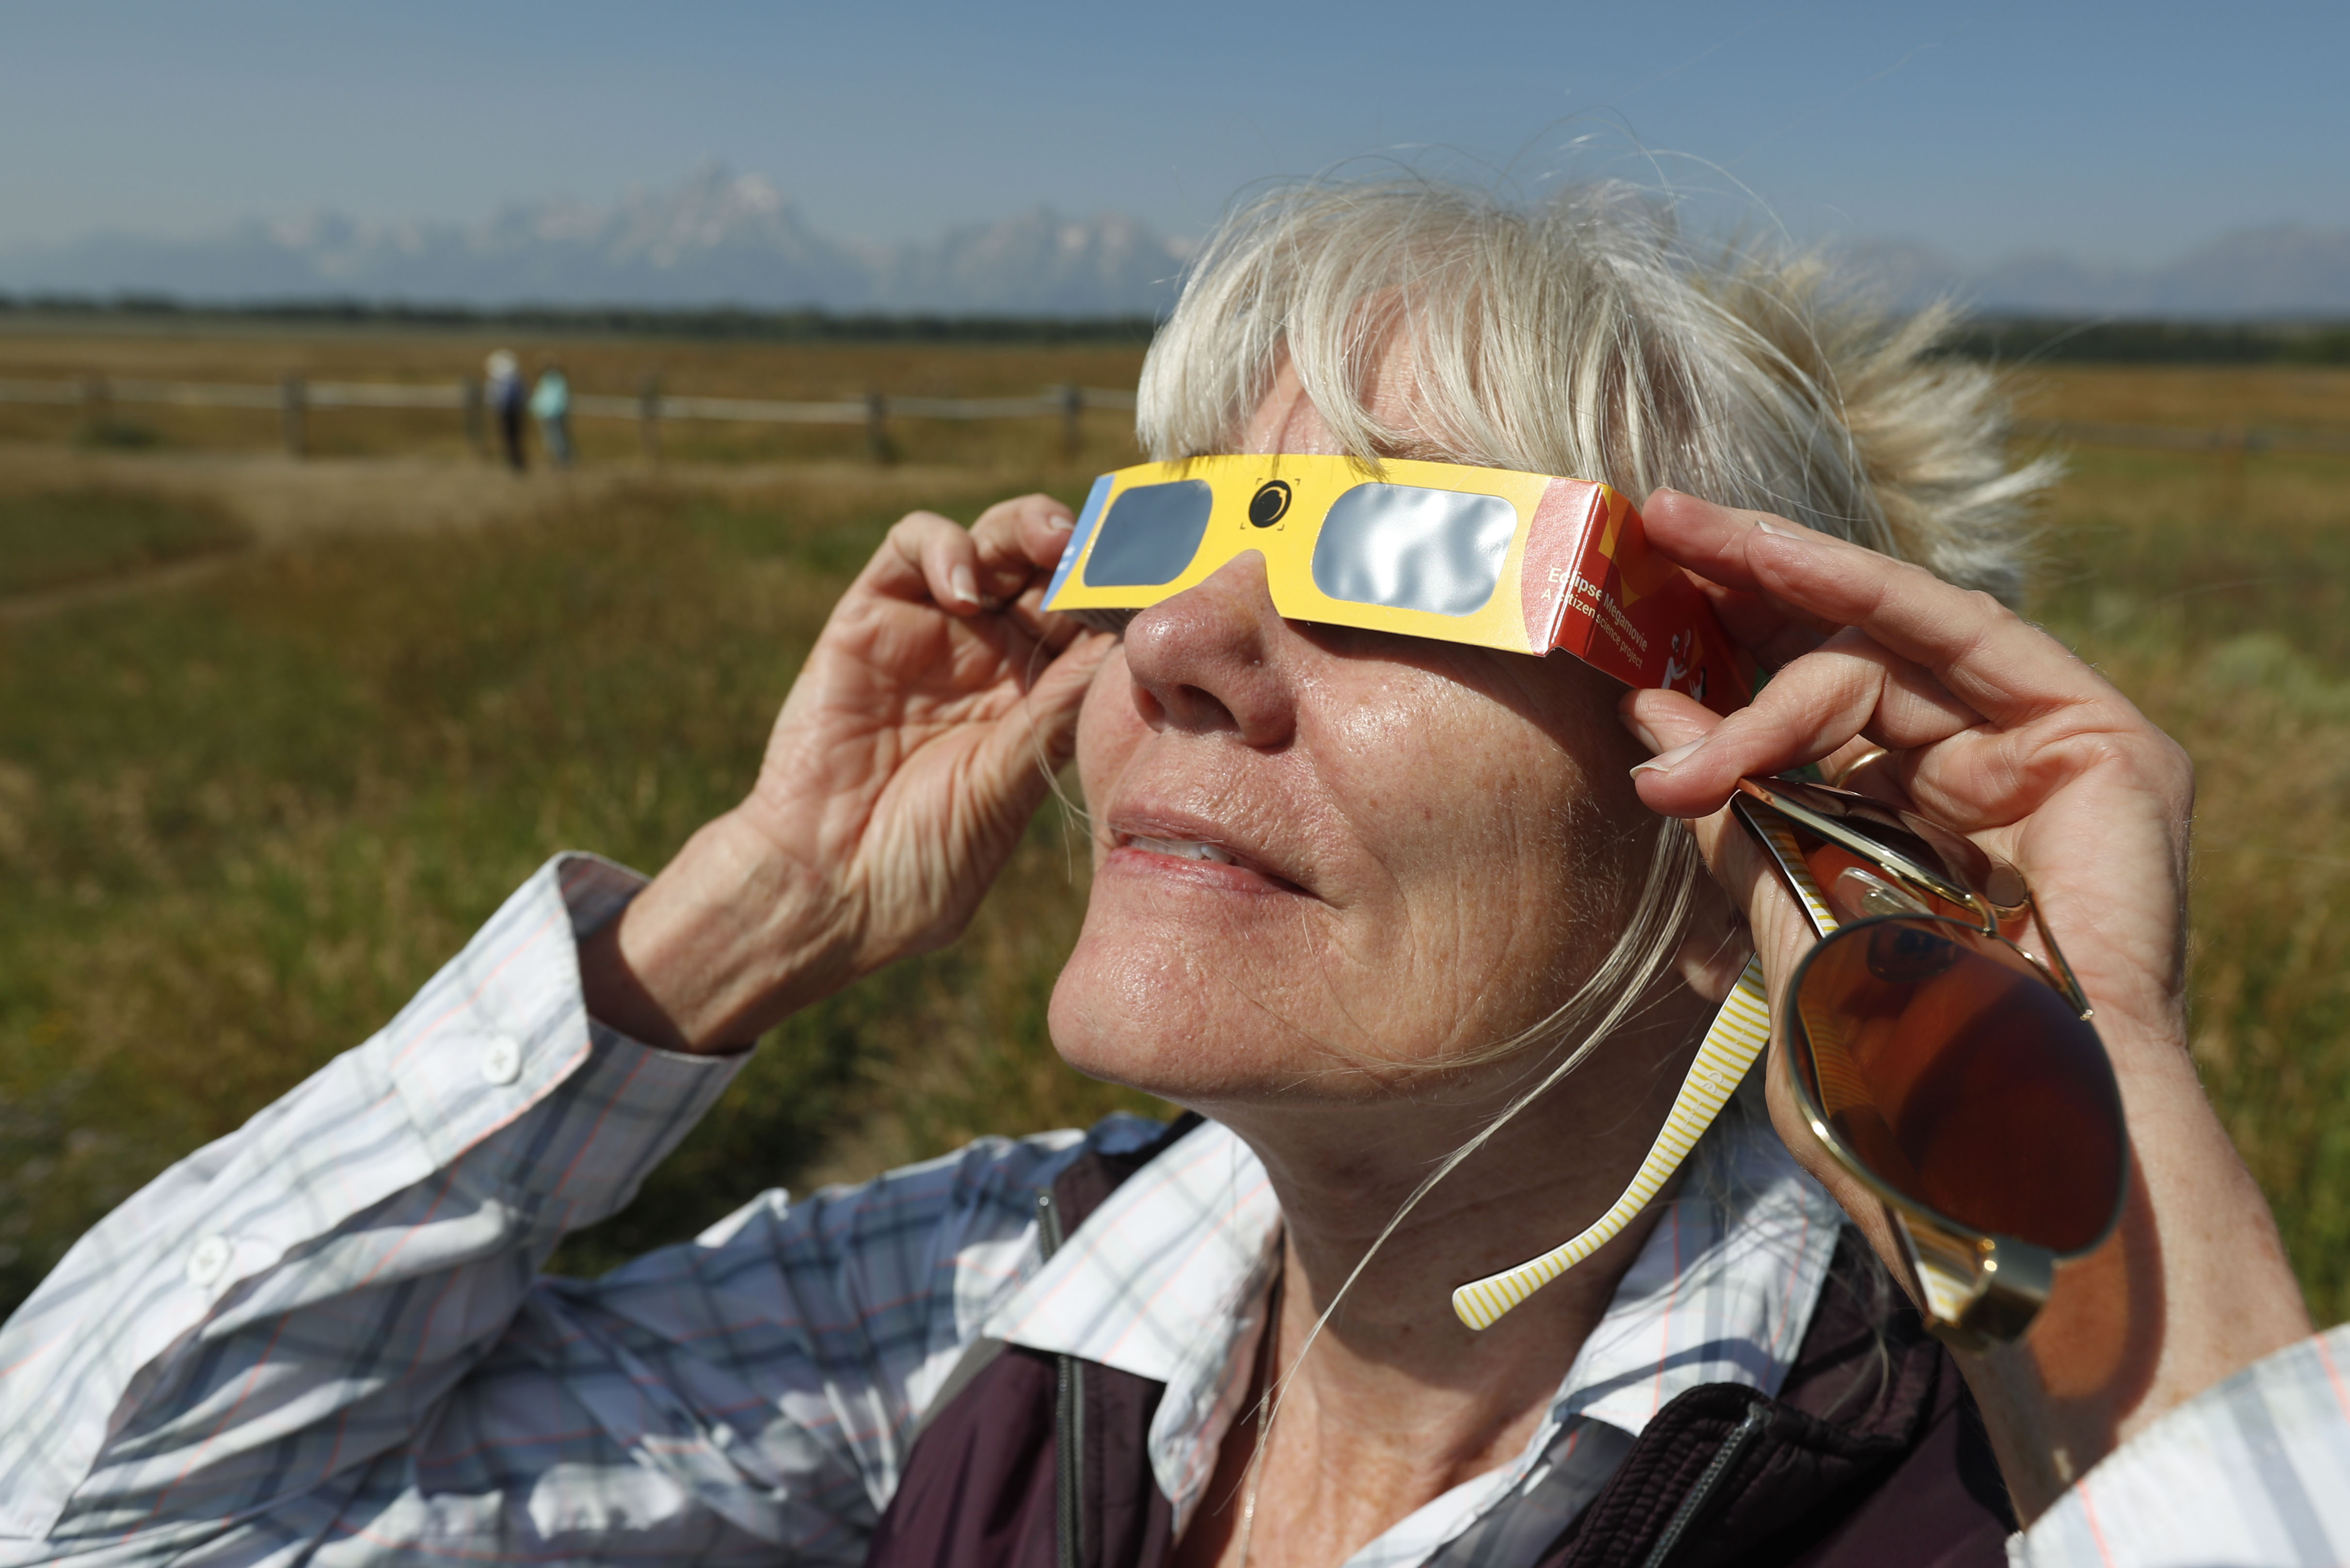 A woman tests her solar eclipse glasses